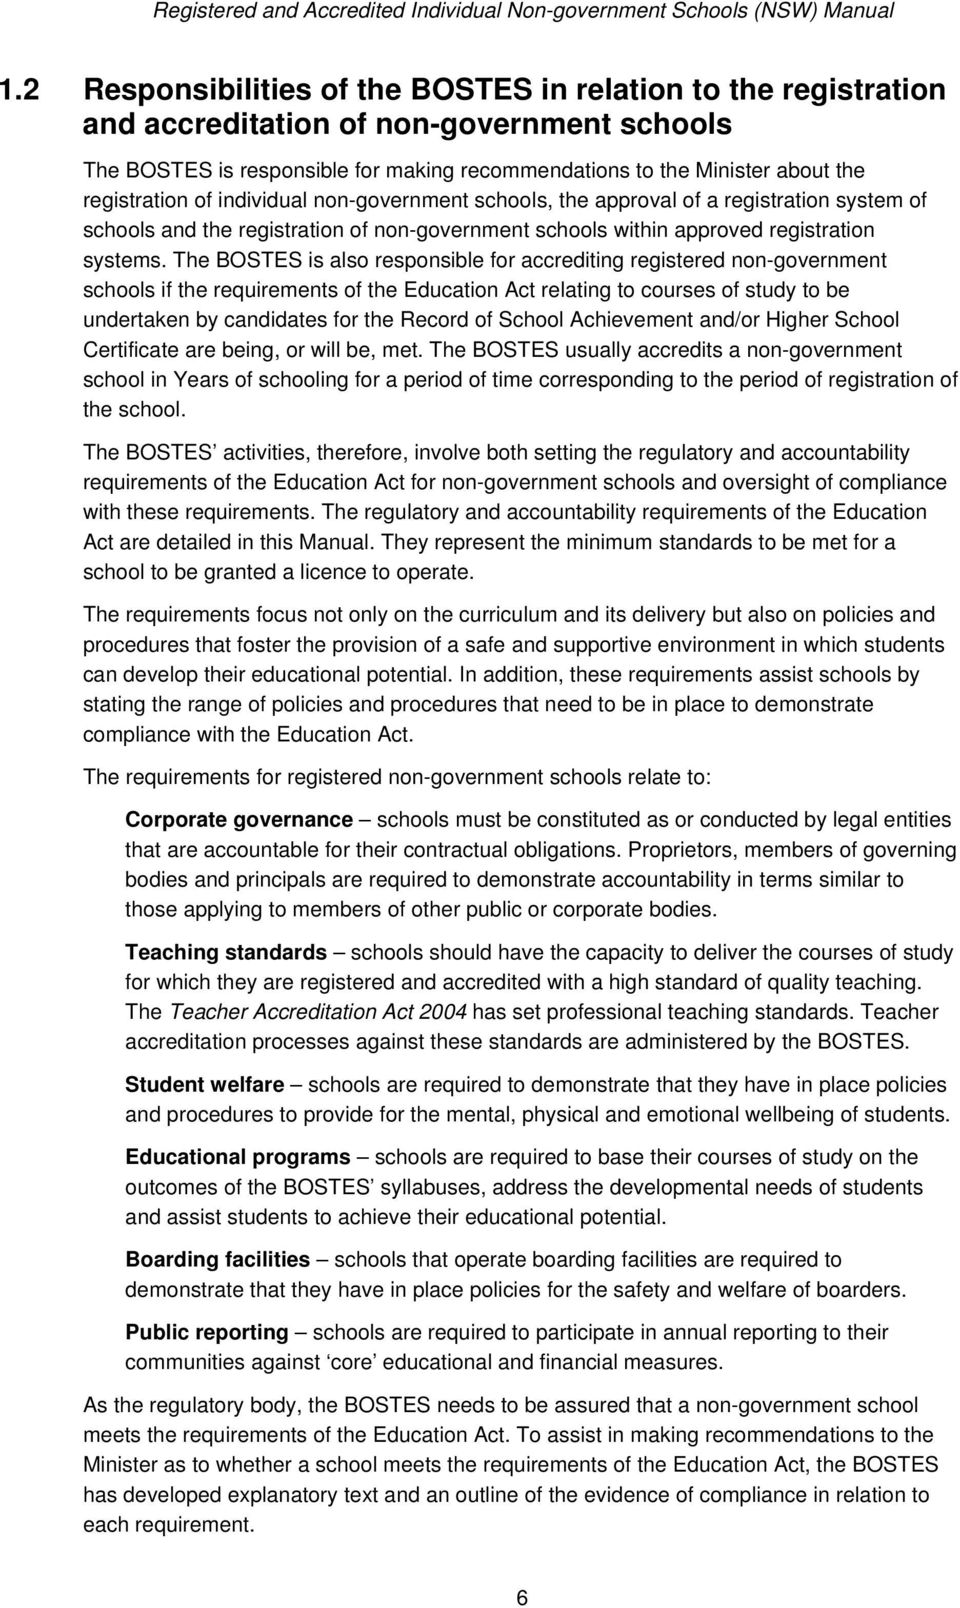 The BOSTES is also responsible for accrediting registered non-government schools if the requirements of the Education Act relating to courses of study to be undertaken by candidates for the Record of